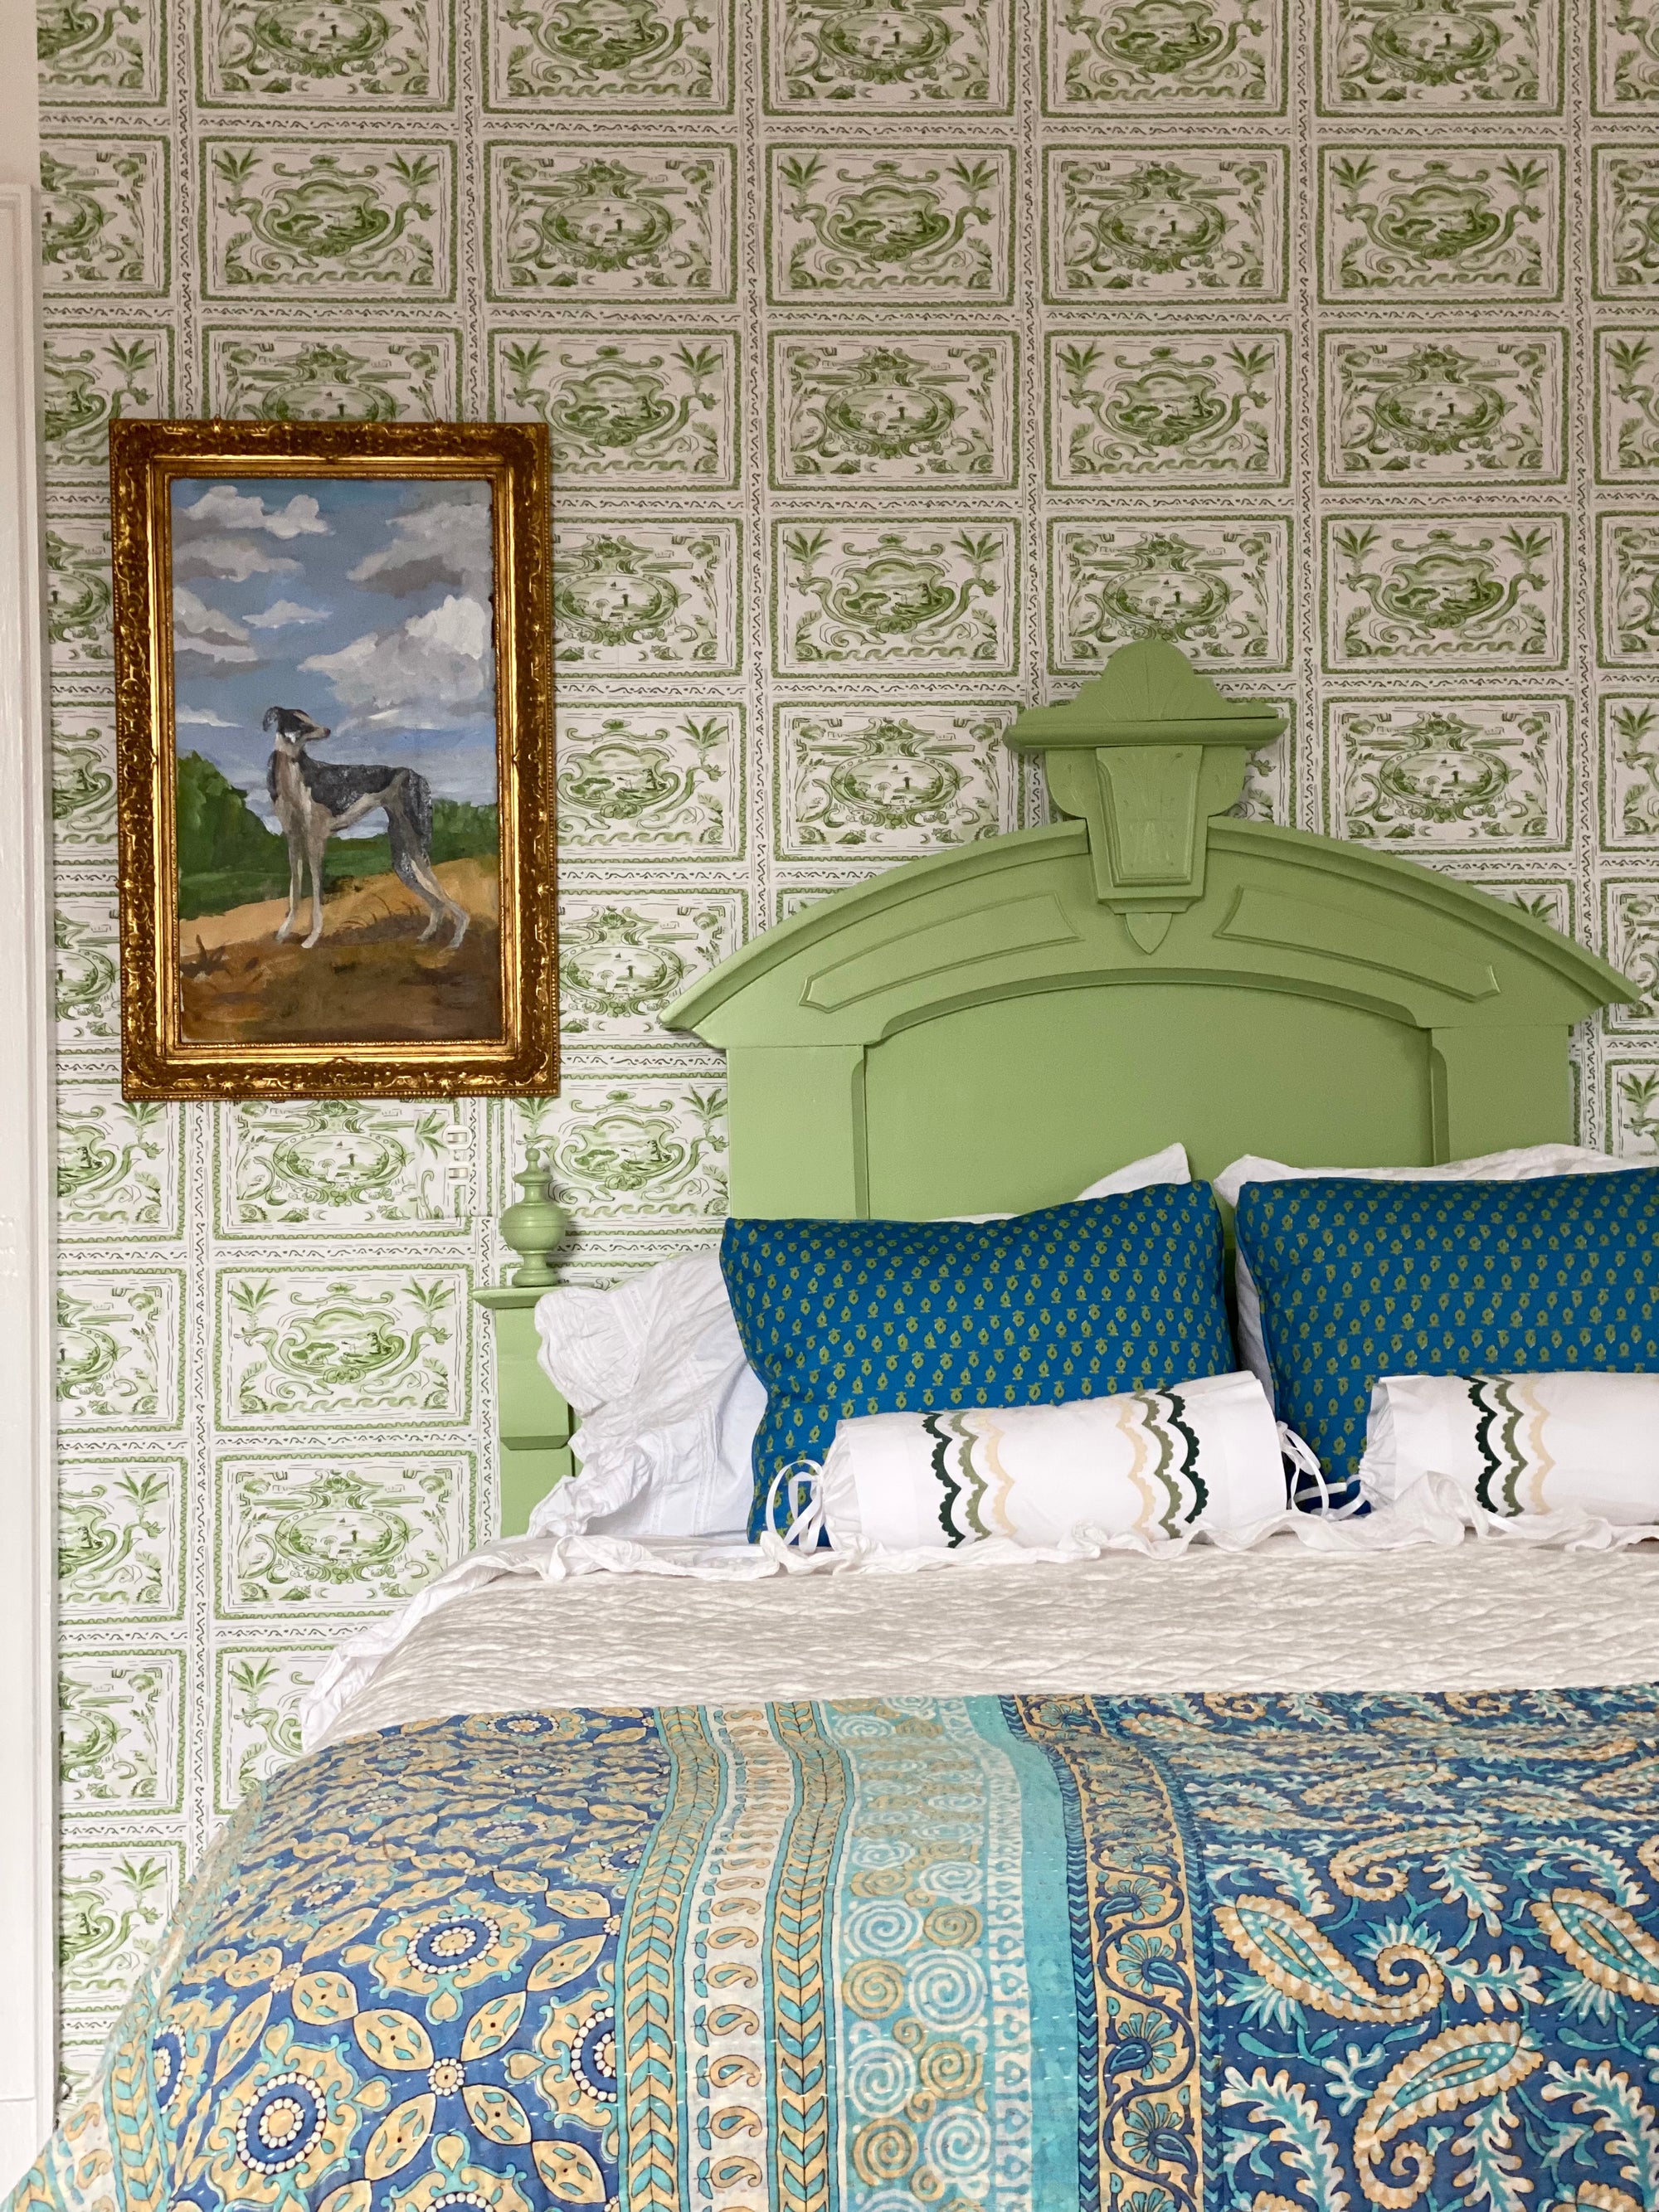 Pliny Toile in Green, Wallpaper and Fabric